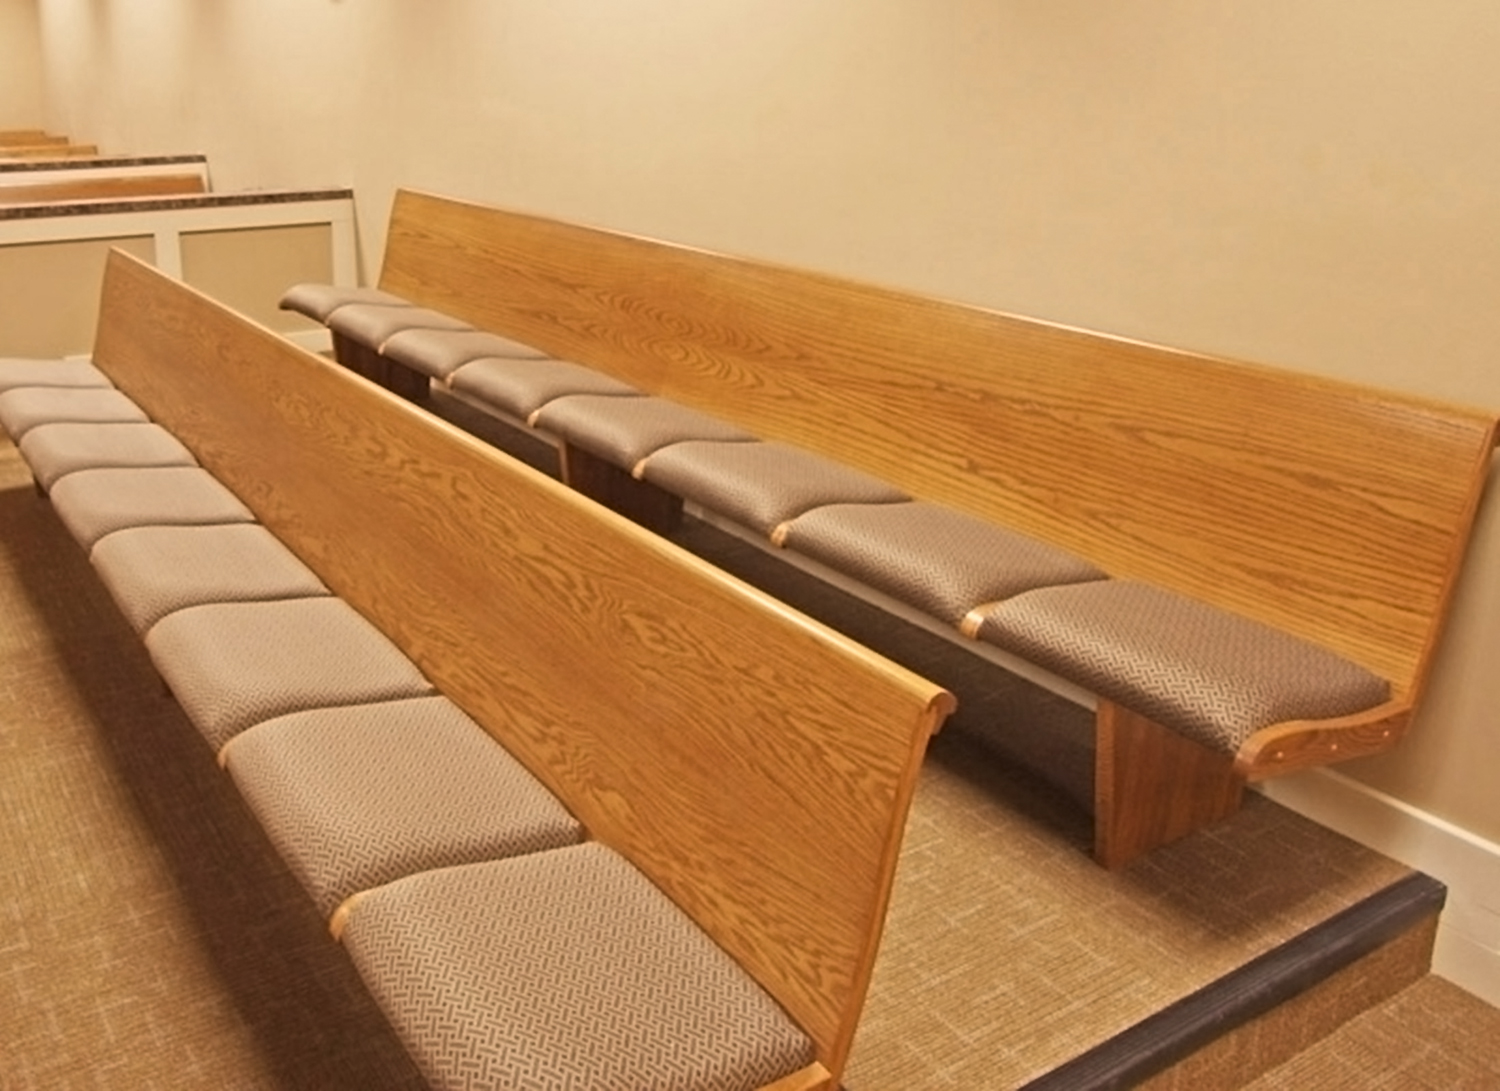 Upholstered Definity Seat and Wood Back Benches inside Box Elder County Courts - Brigham City, UT